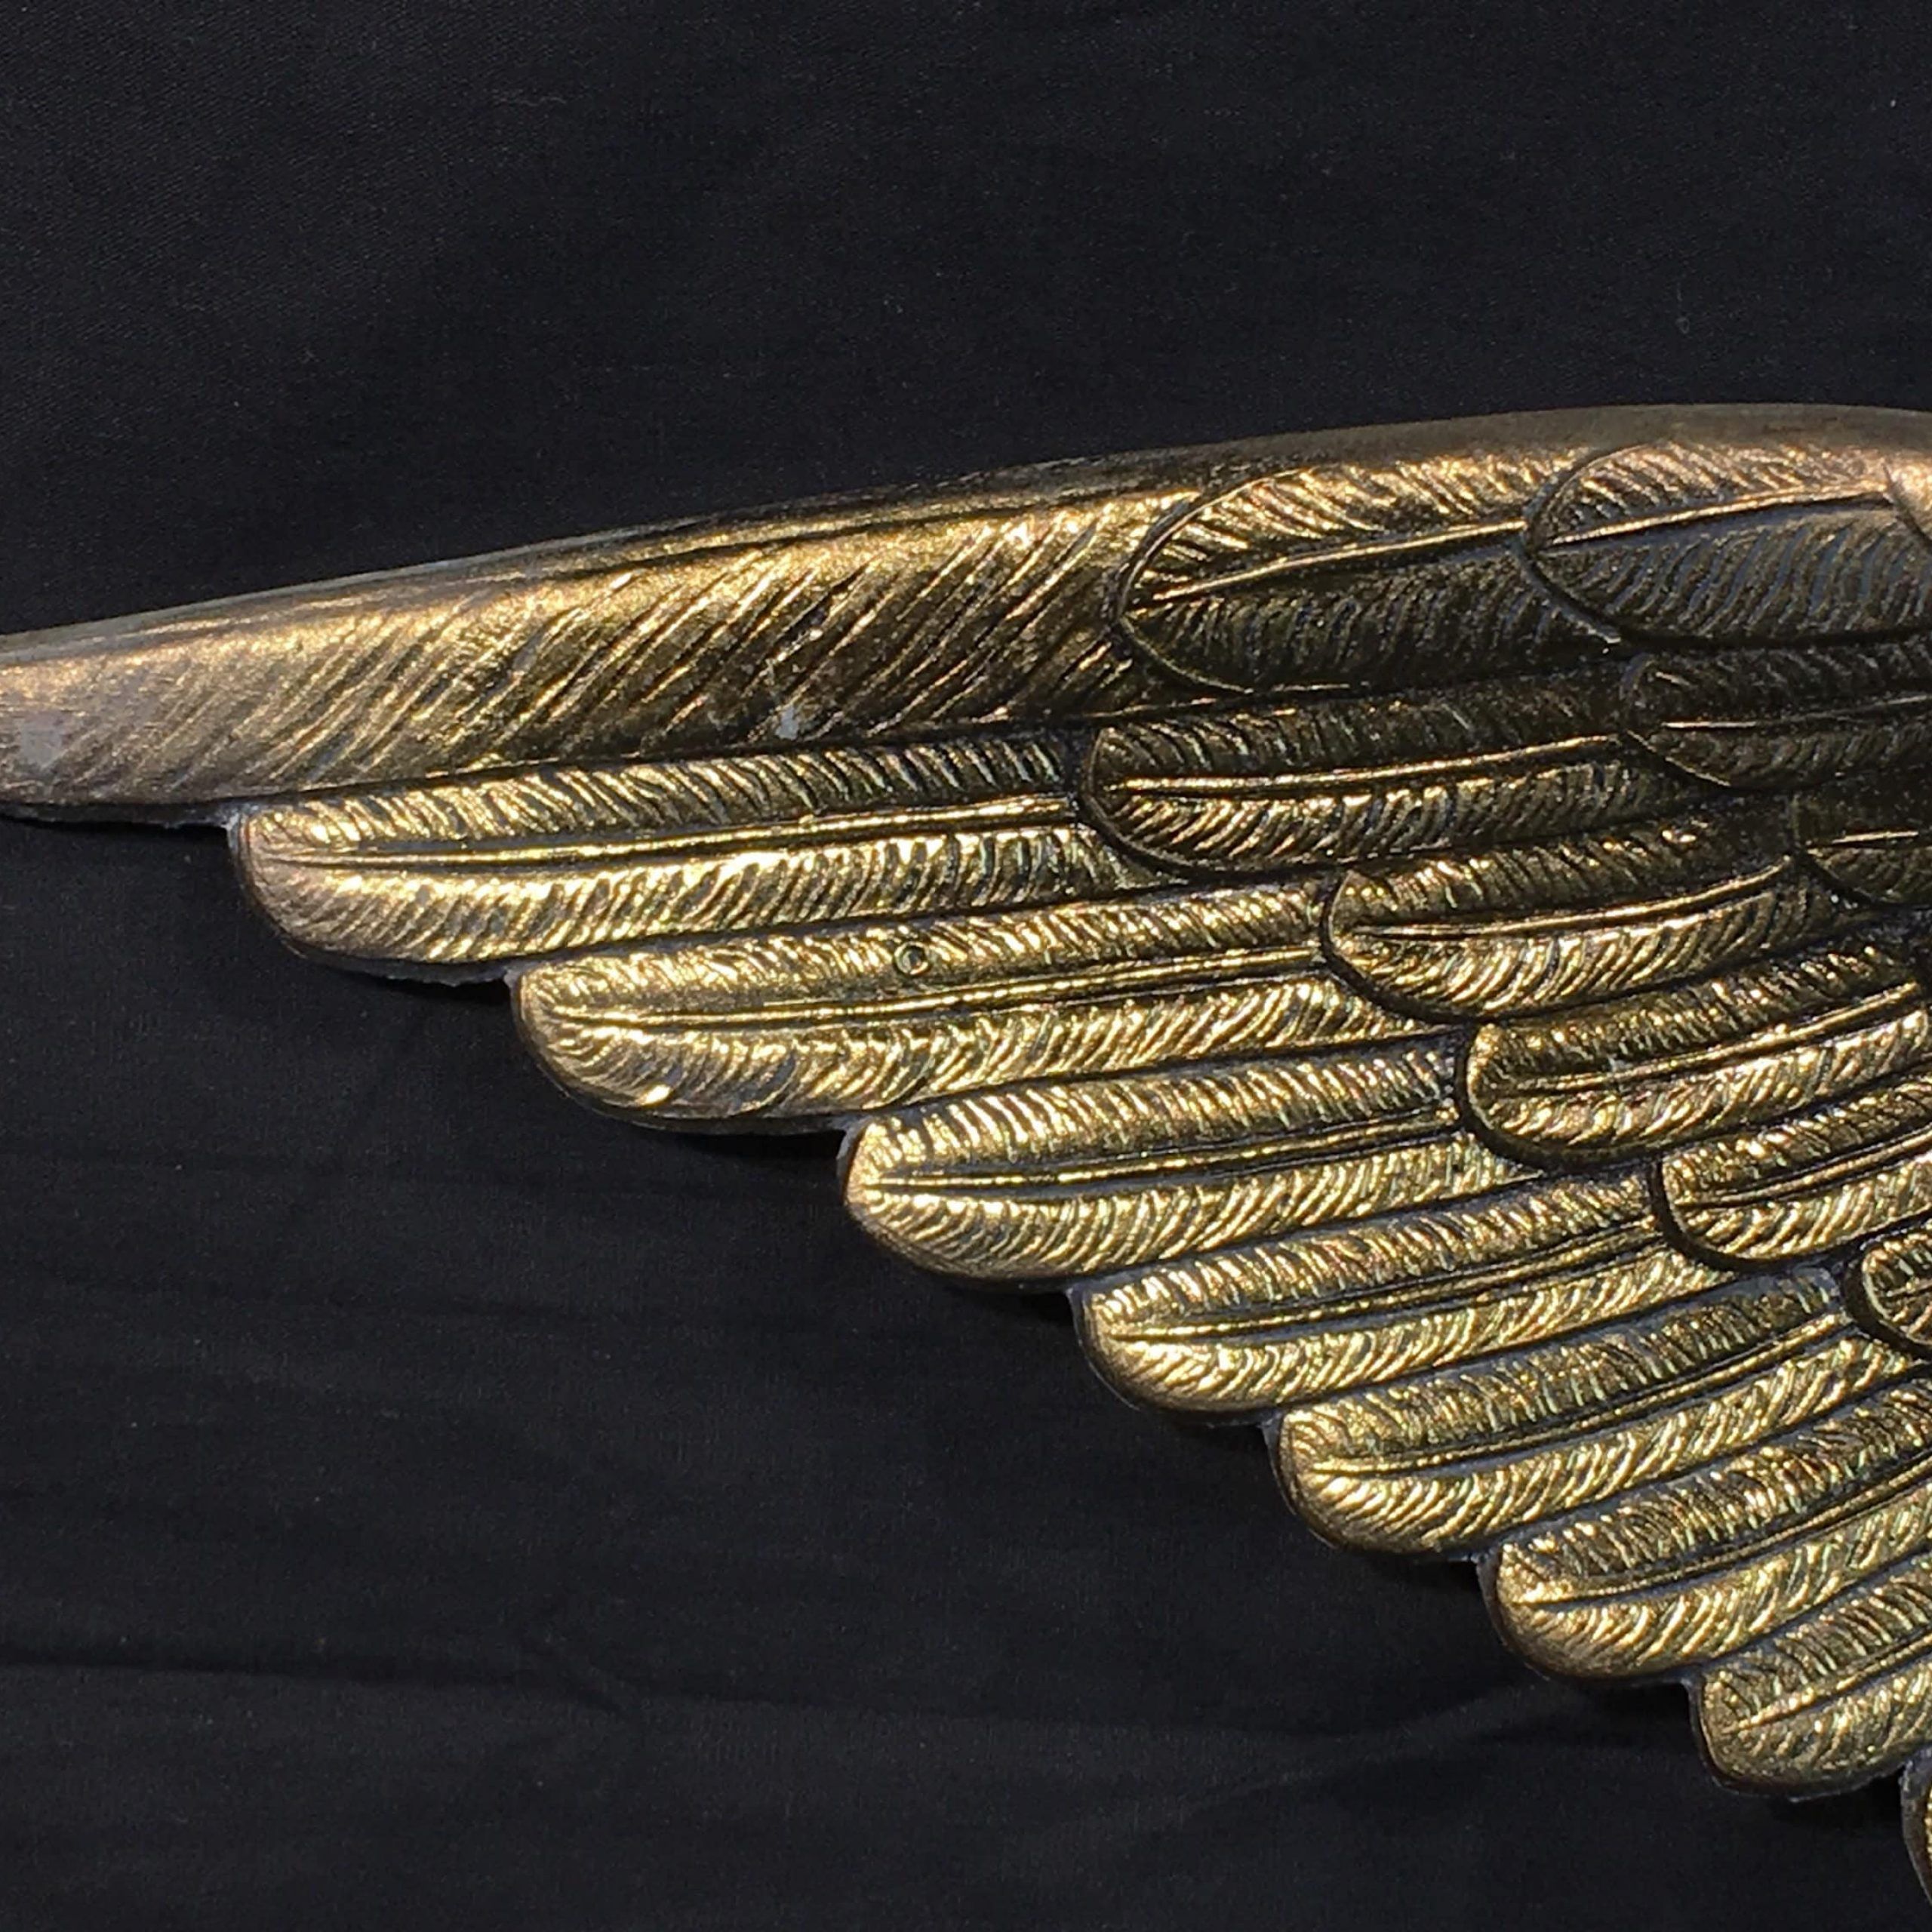 Vintage Brass Eagle, Decorative Gold Wall Decor, Wall Hanging Wildlife Within Recent Eagle Wall Art (View 4 of 20)